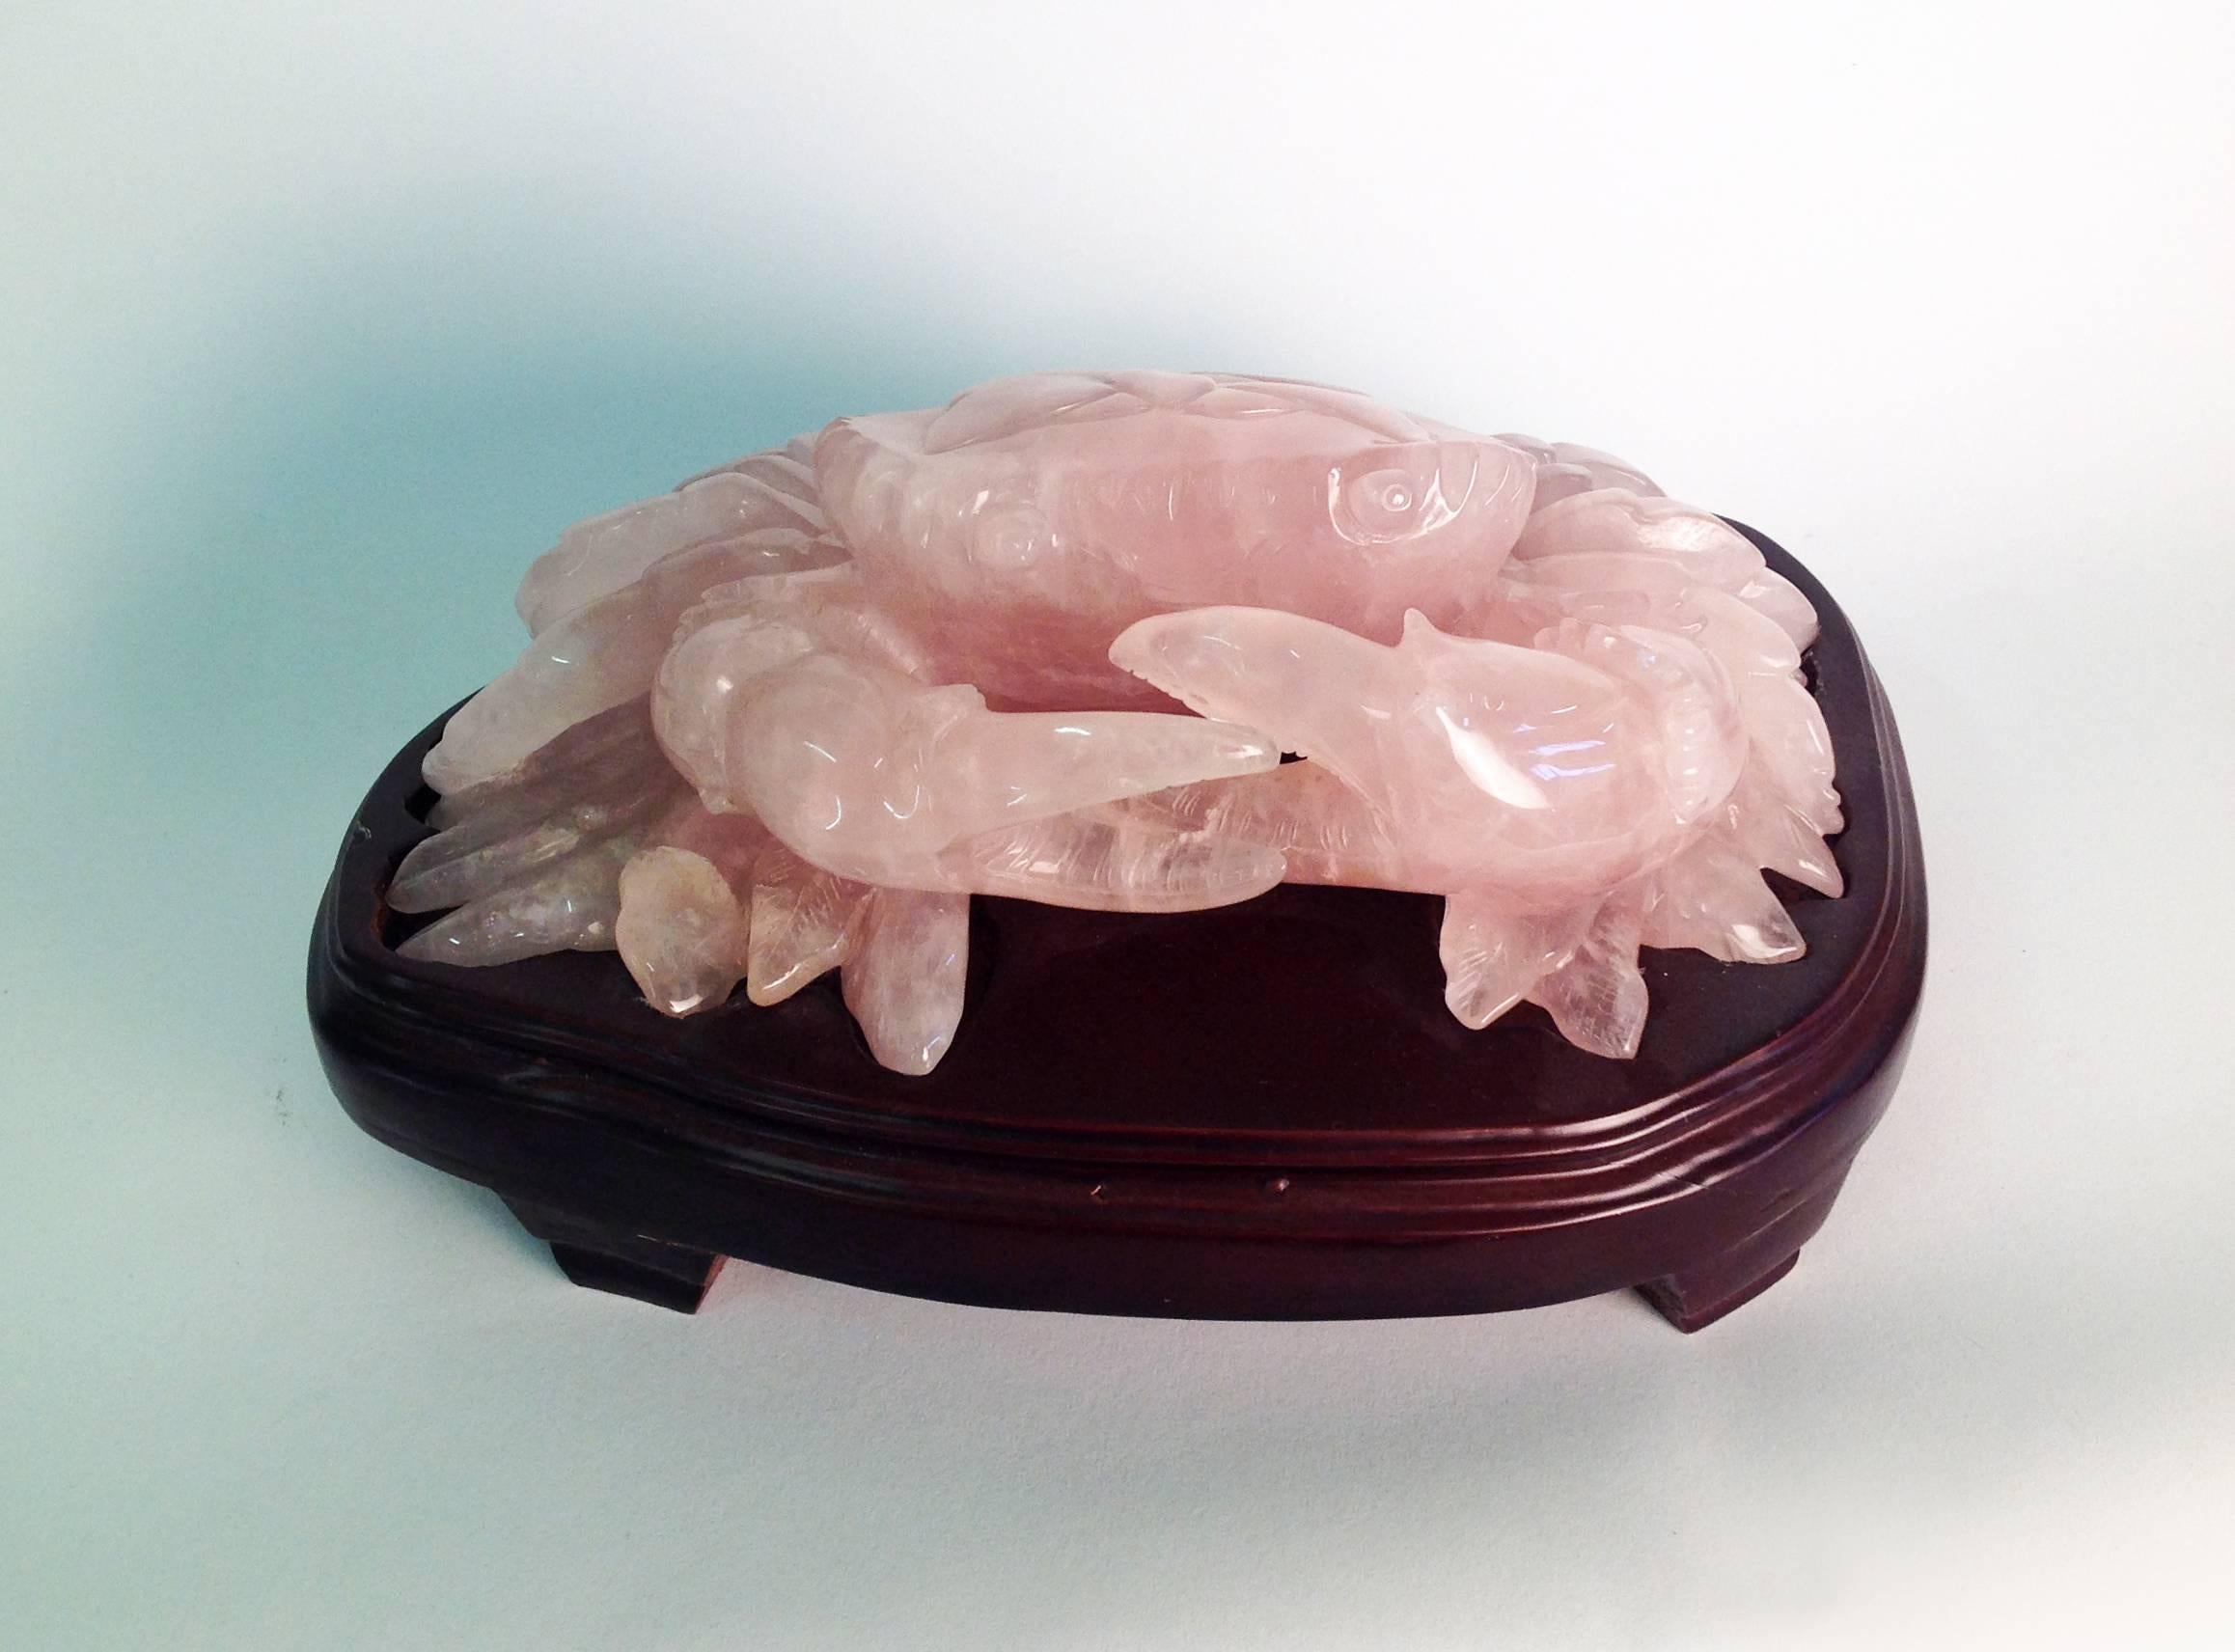 A beautiful sculpture in rose quartz with wooden base produced in China. Italian private collection. Weight Kg 4,59.